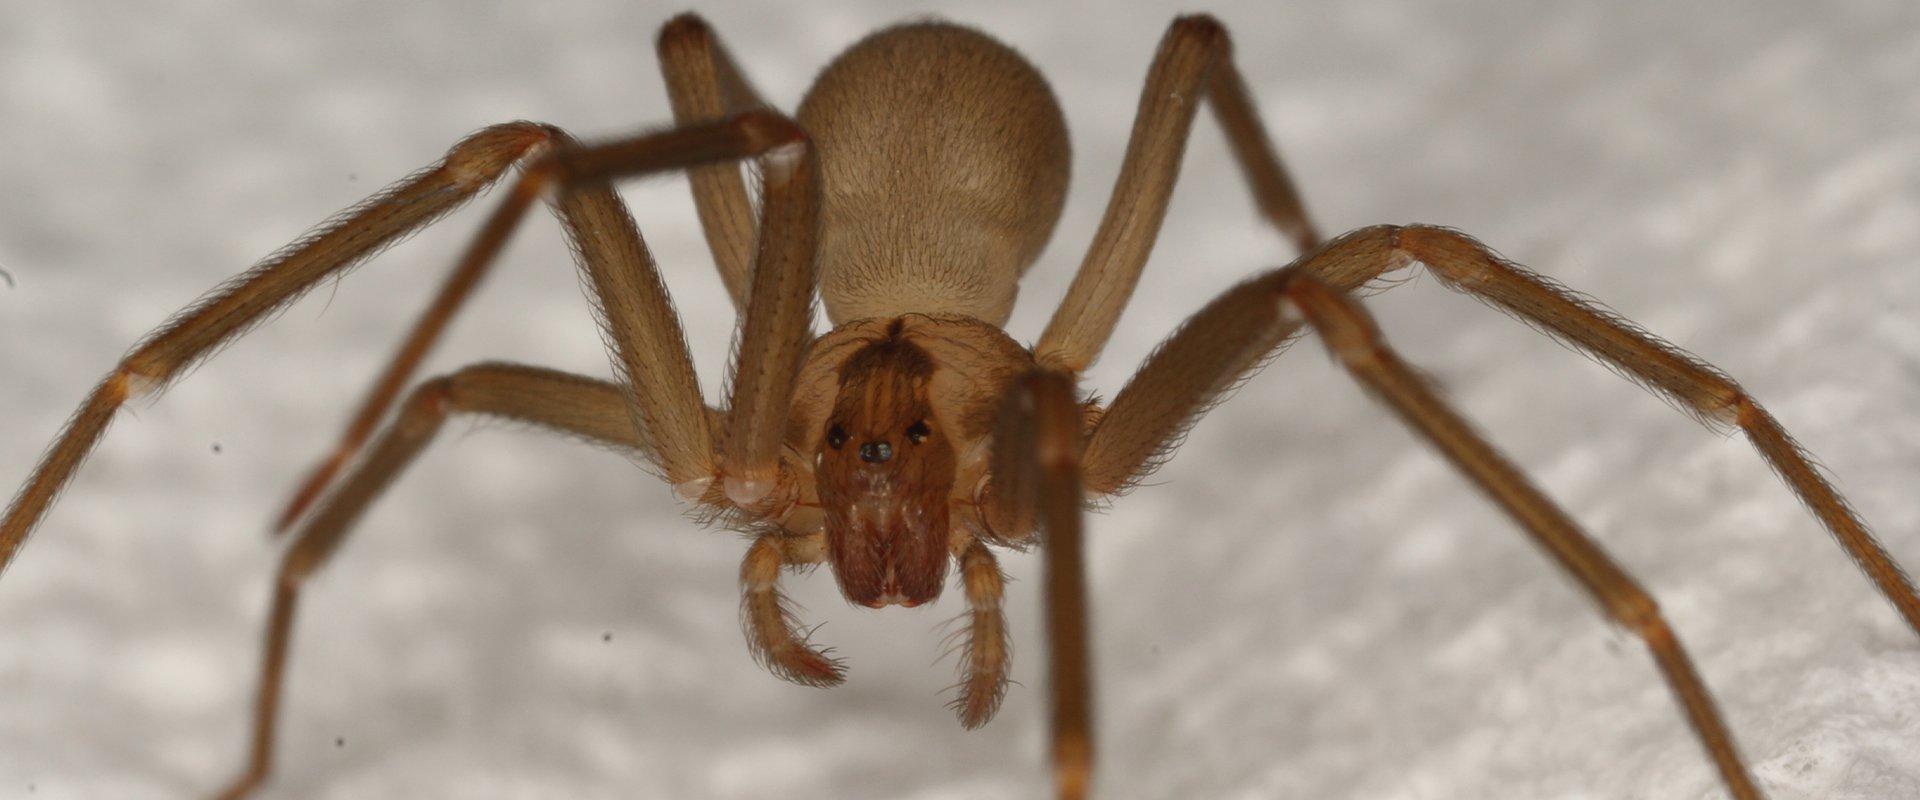 brown recluse spider on paper towel